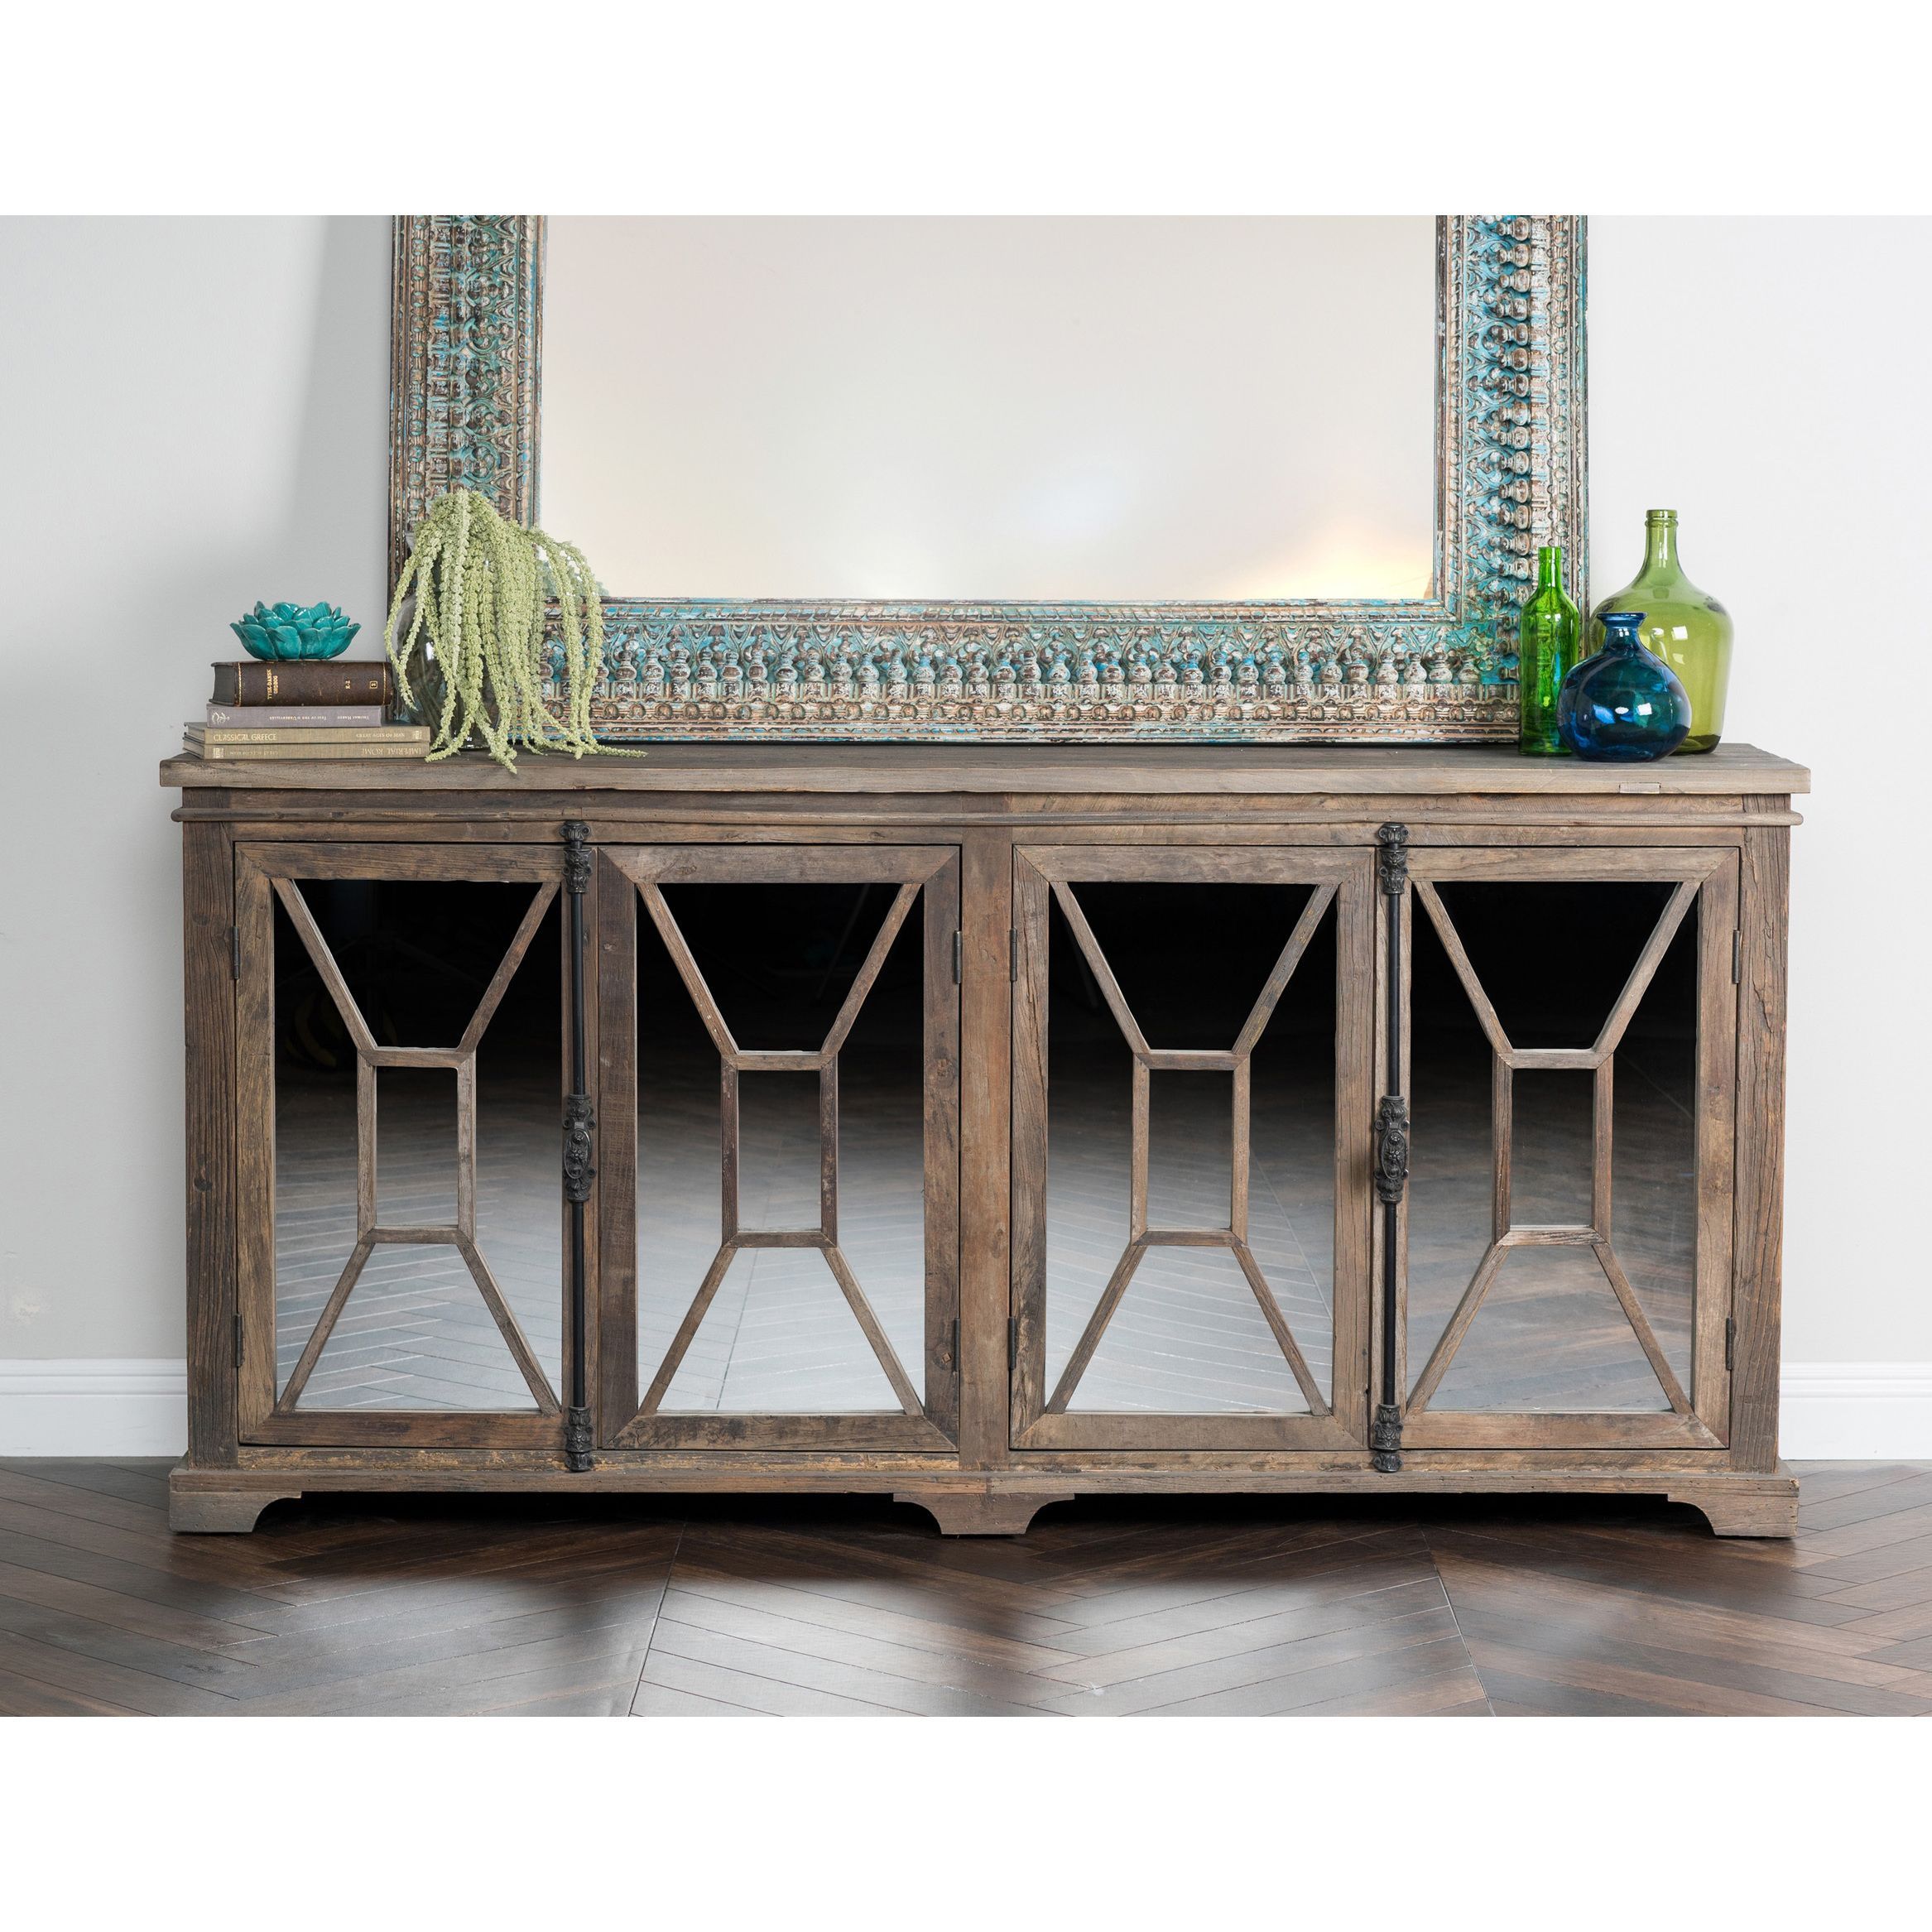 Decorate Your Home With A Unique Rustic Look With This Within Papadopoulos Sideboards (View 3 of 30)